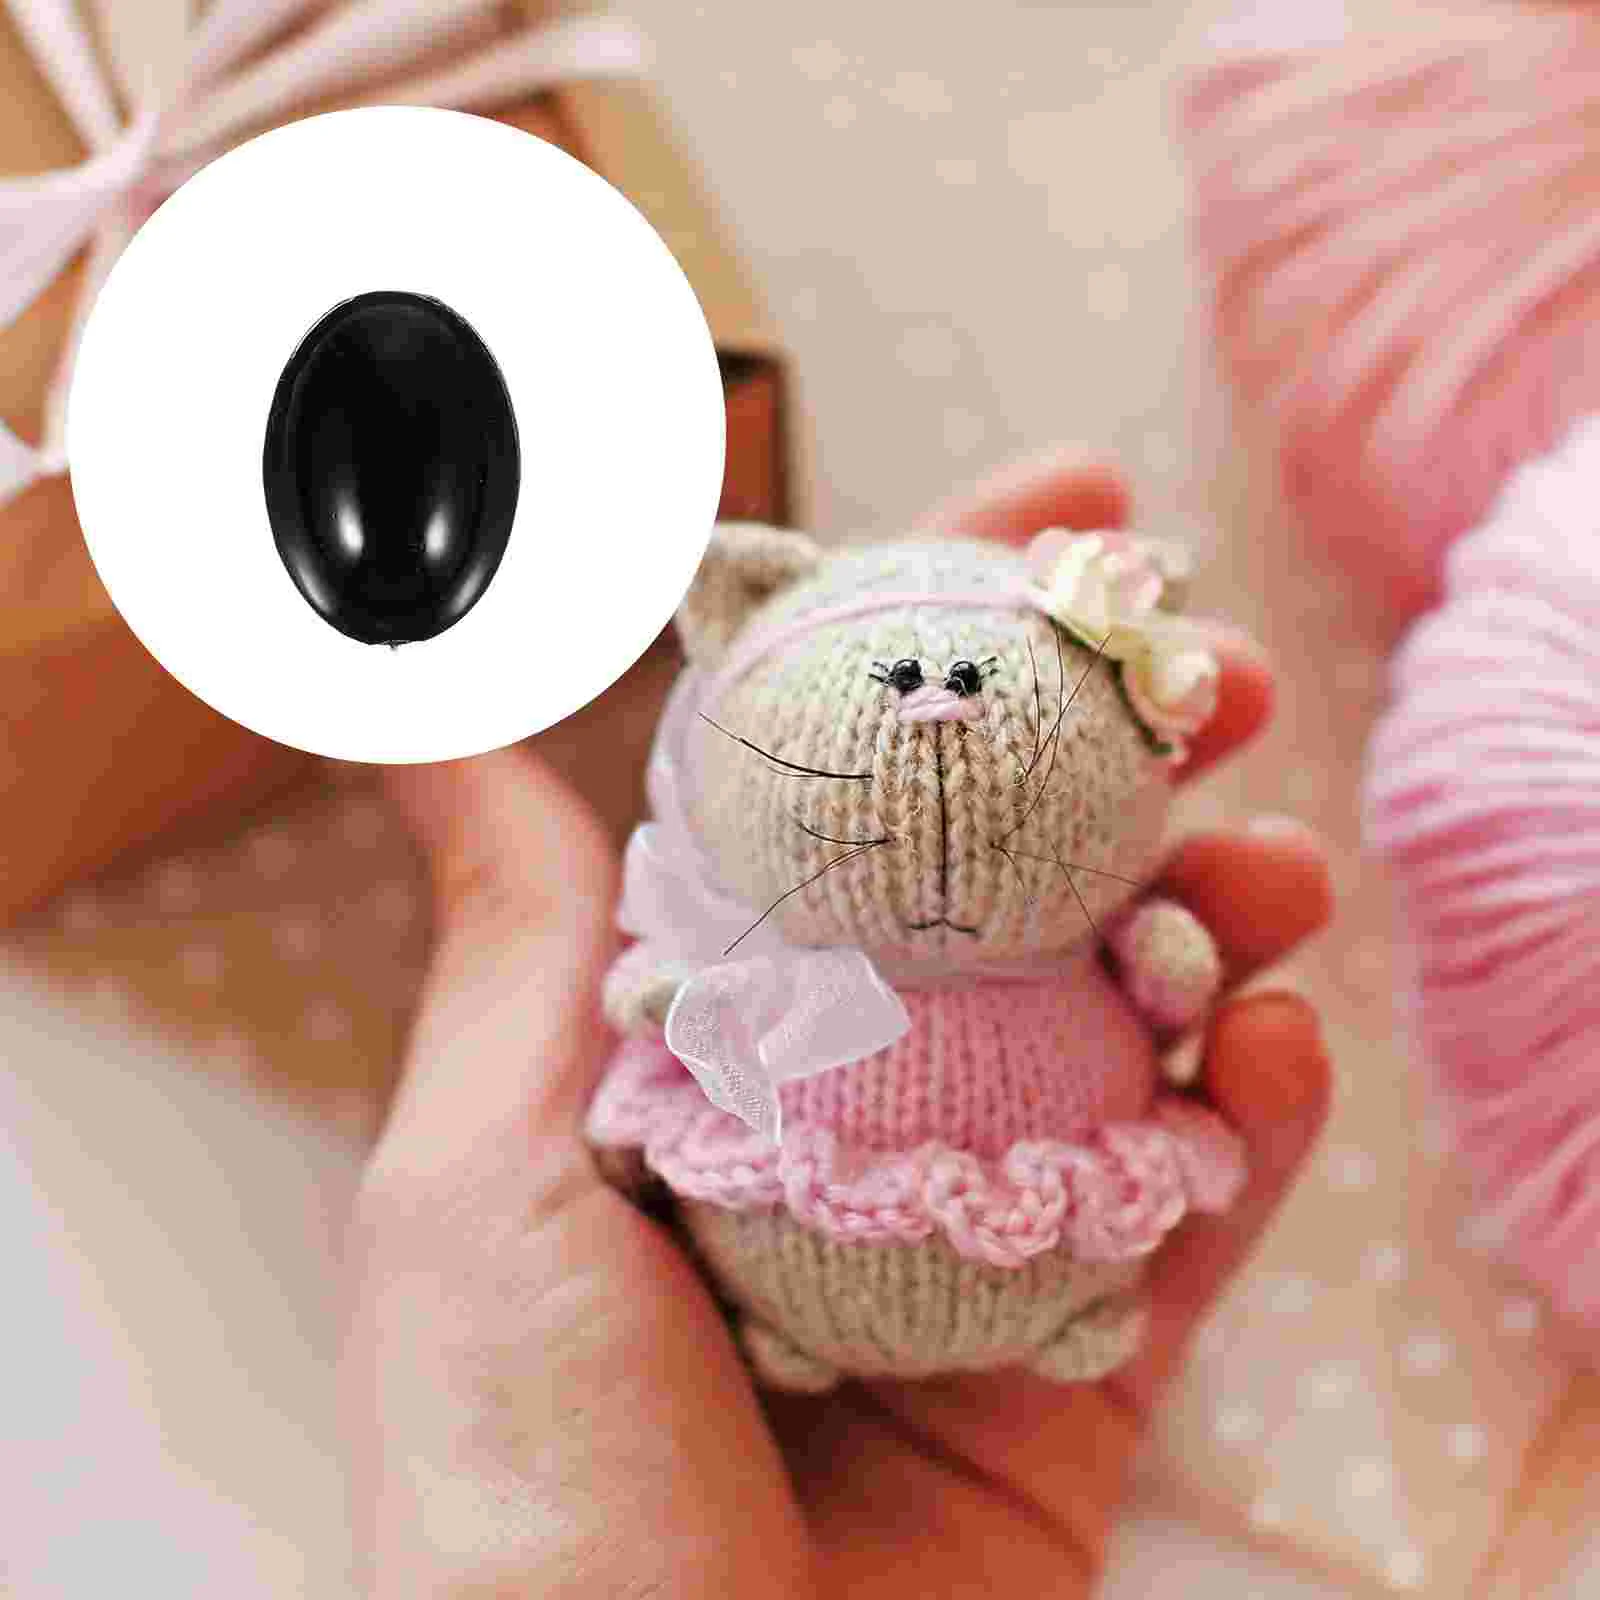 

Toy Nose DIY Accessories Plastic Dolls Eyes Oval Design Noses Bear Decorative DlY Woven Materials Craft Black